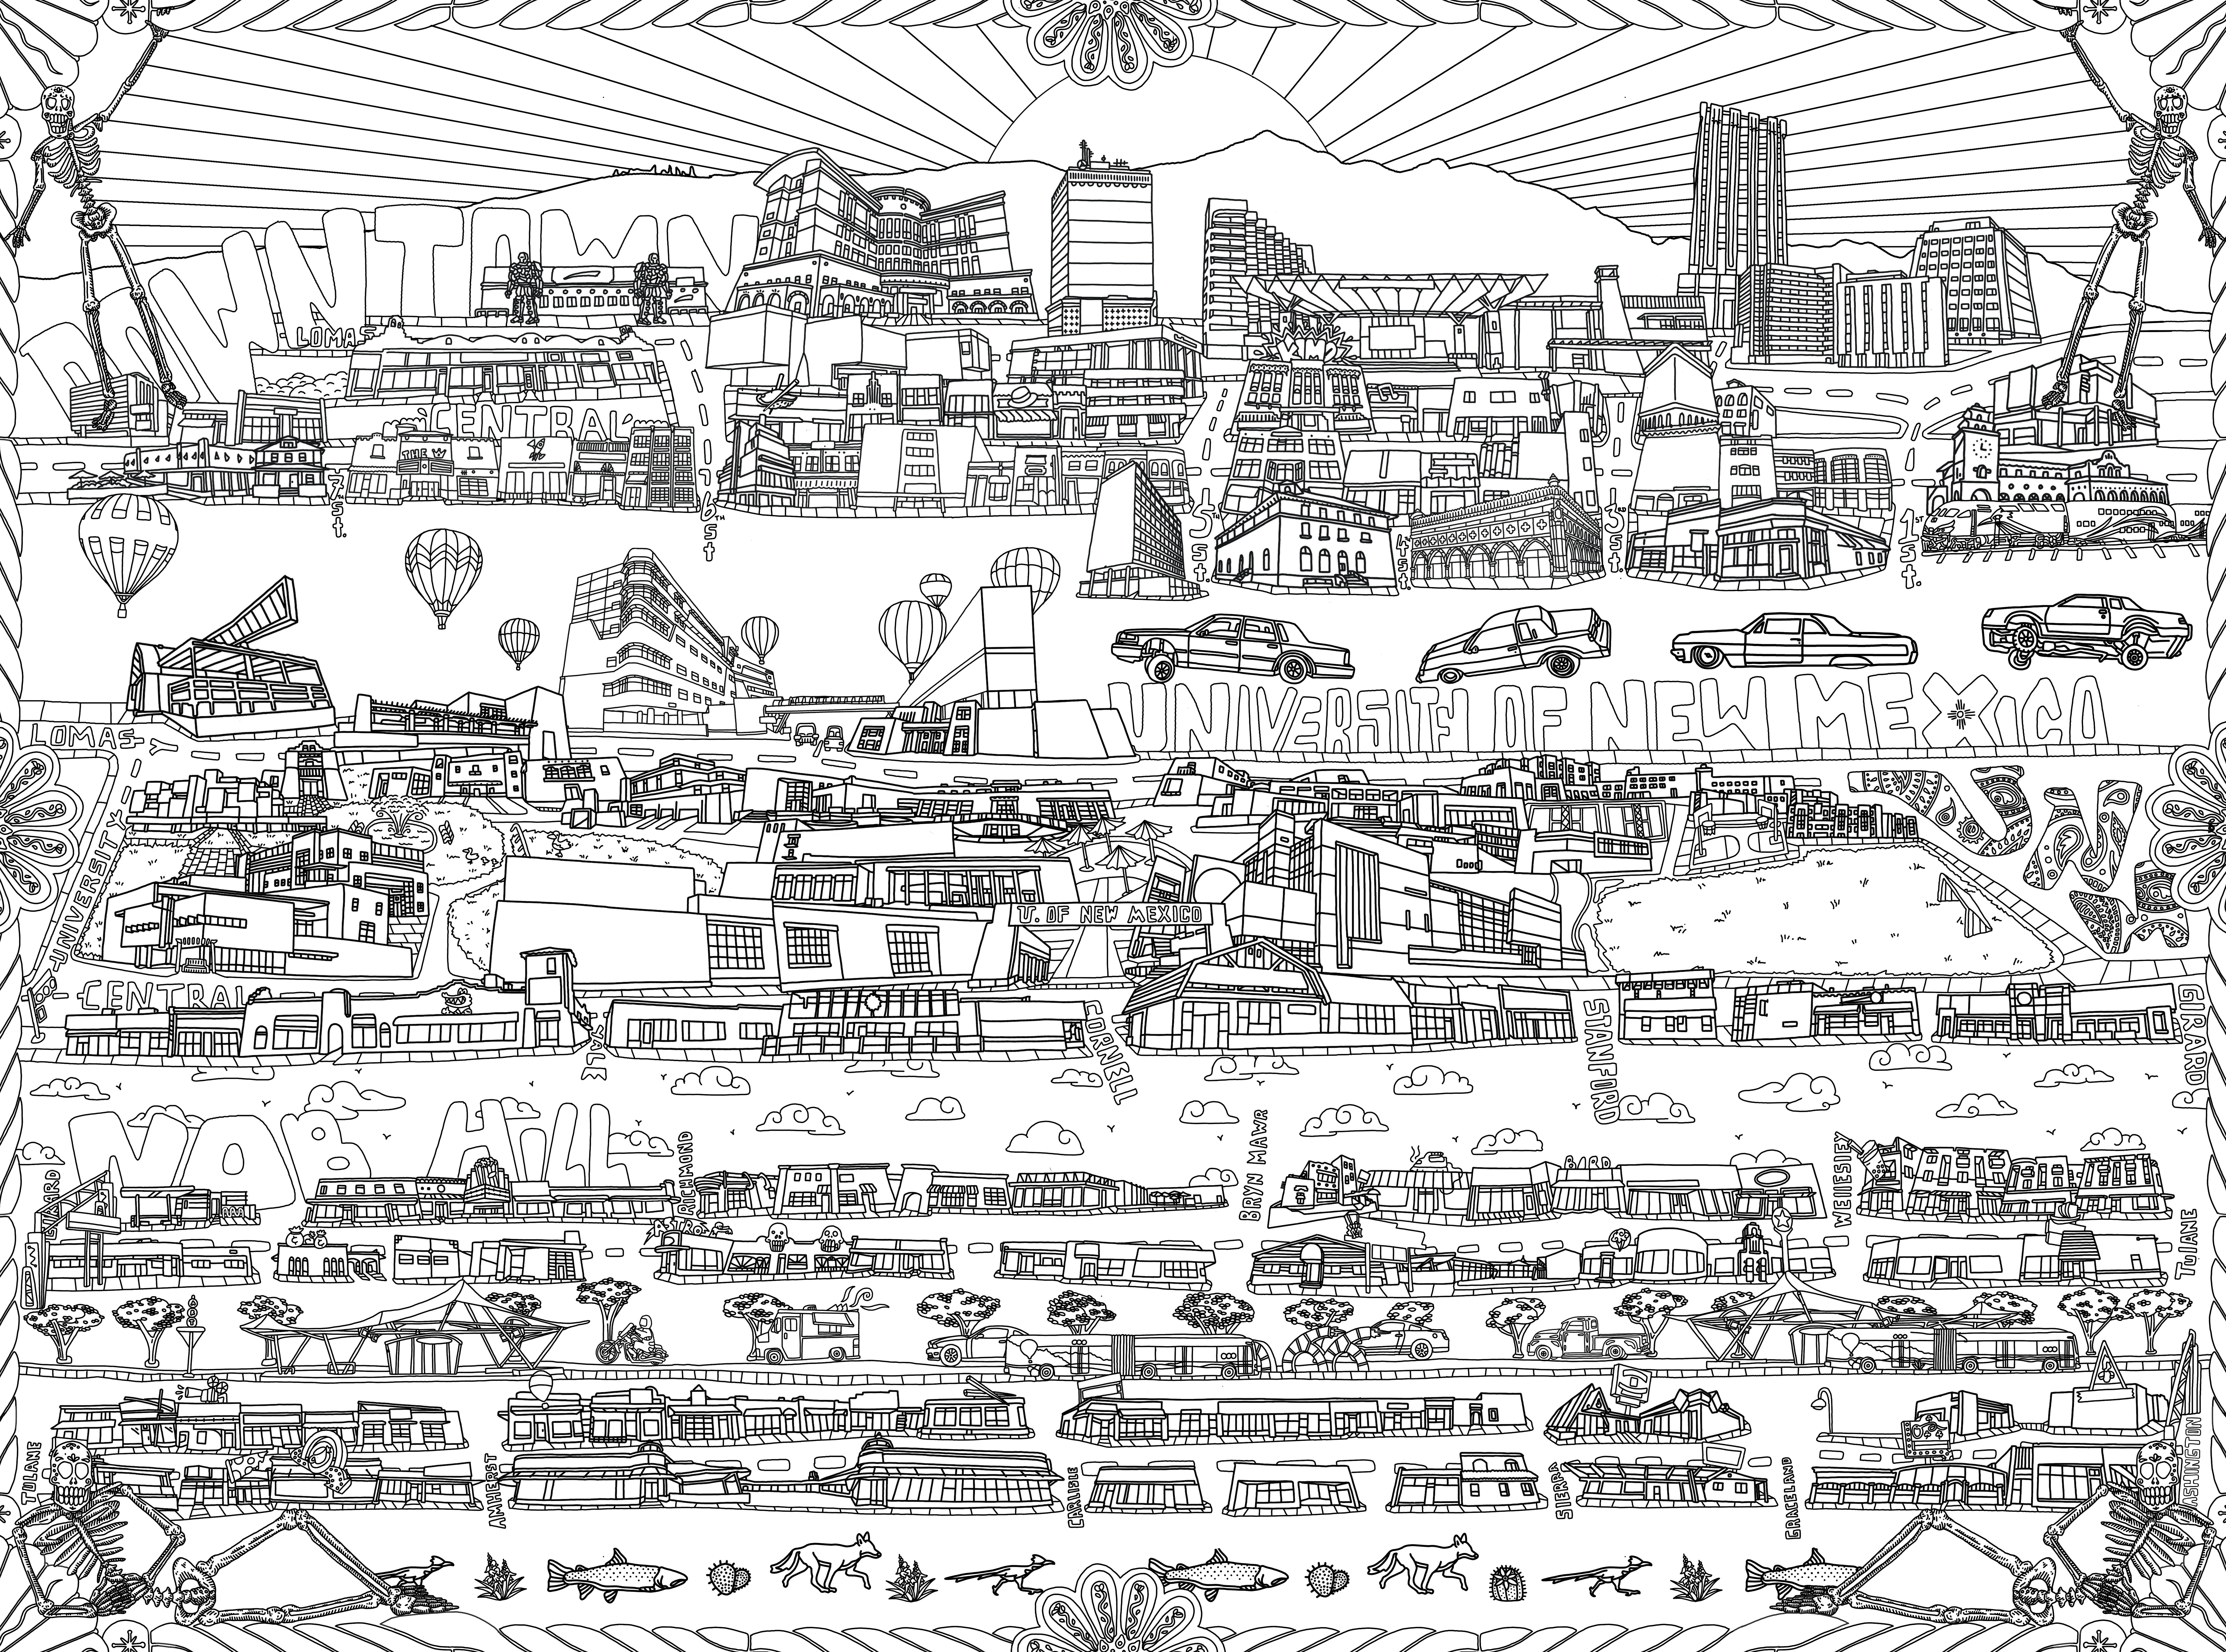 A coloring page with buildings, balloons, cars, animals, skeletons, clouds, and the words Downtown, University of New Mexico, and Nob Hill outlined in black.